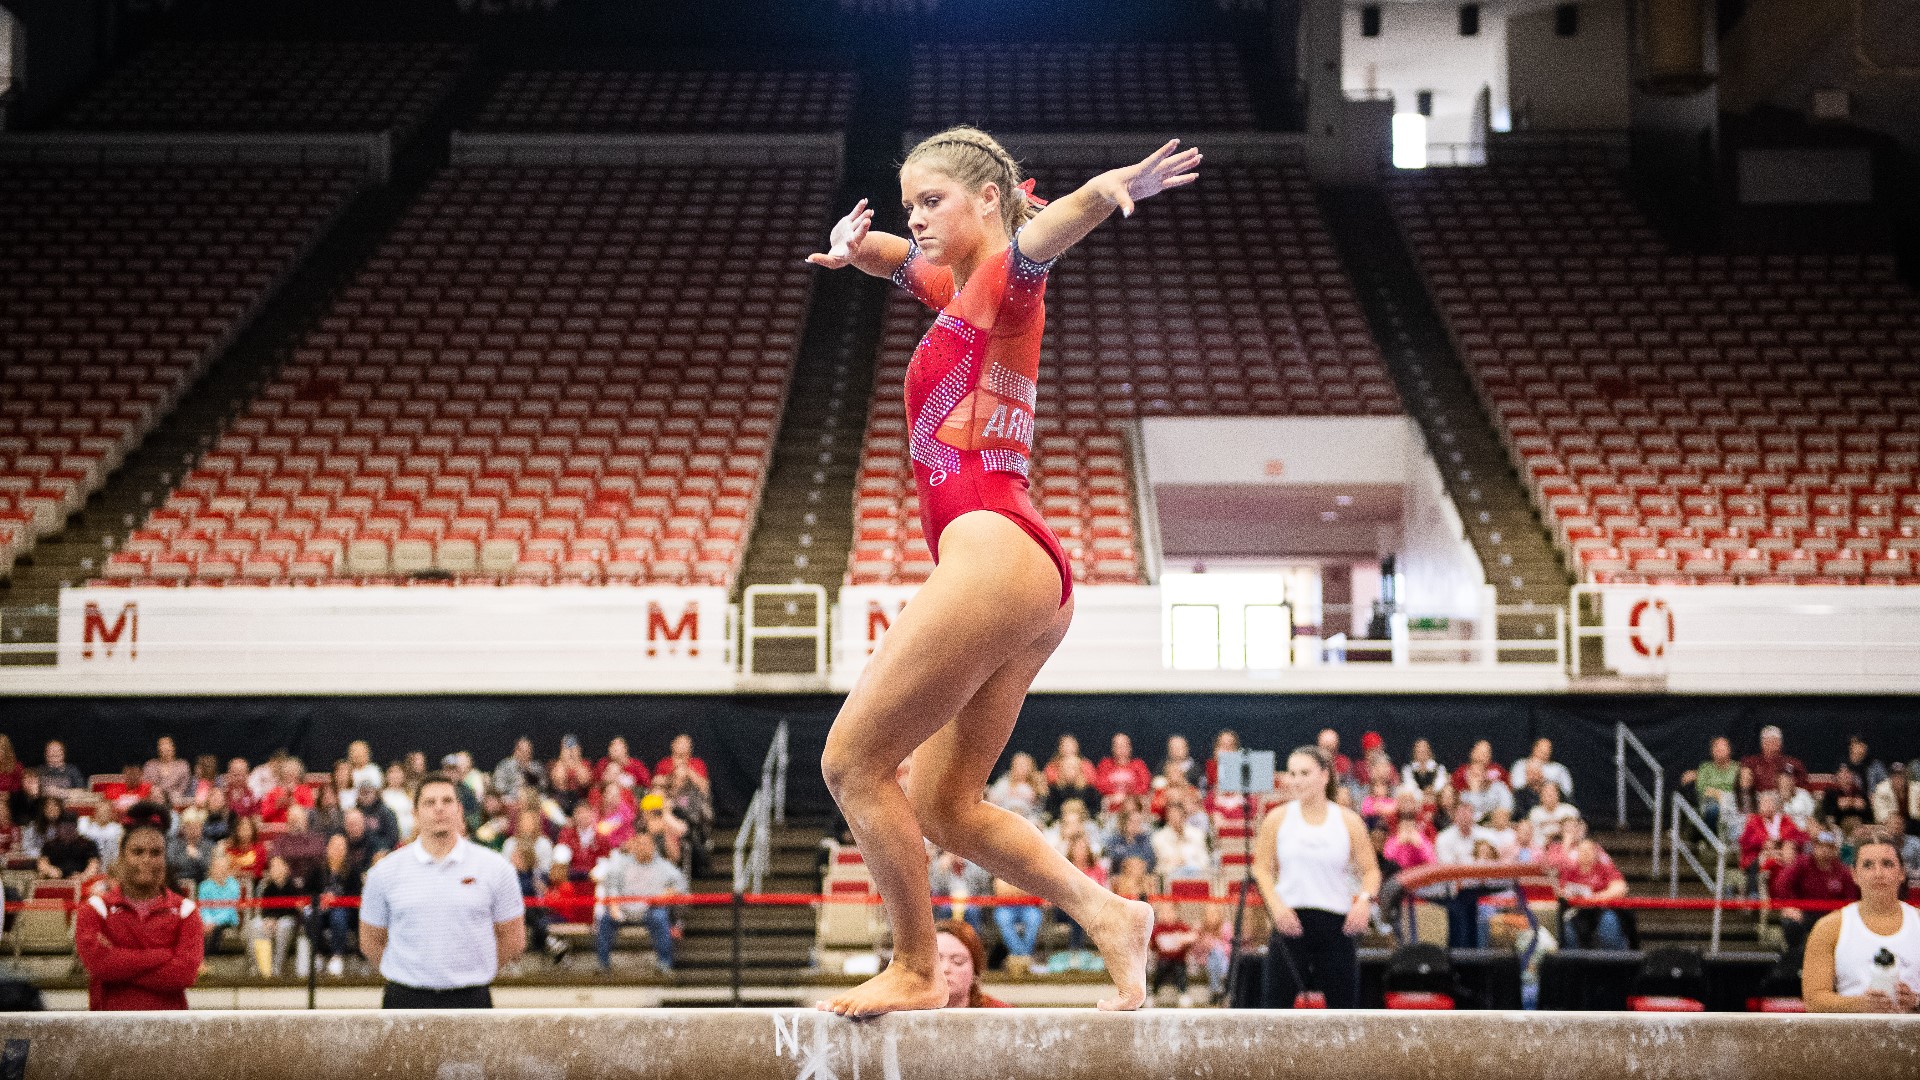 Lauren Williams will suit up for the Gymbacks this season as the first in-state gymnast for the program since 2012.